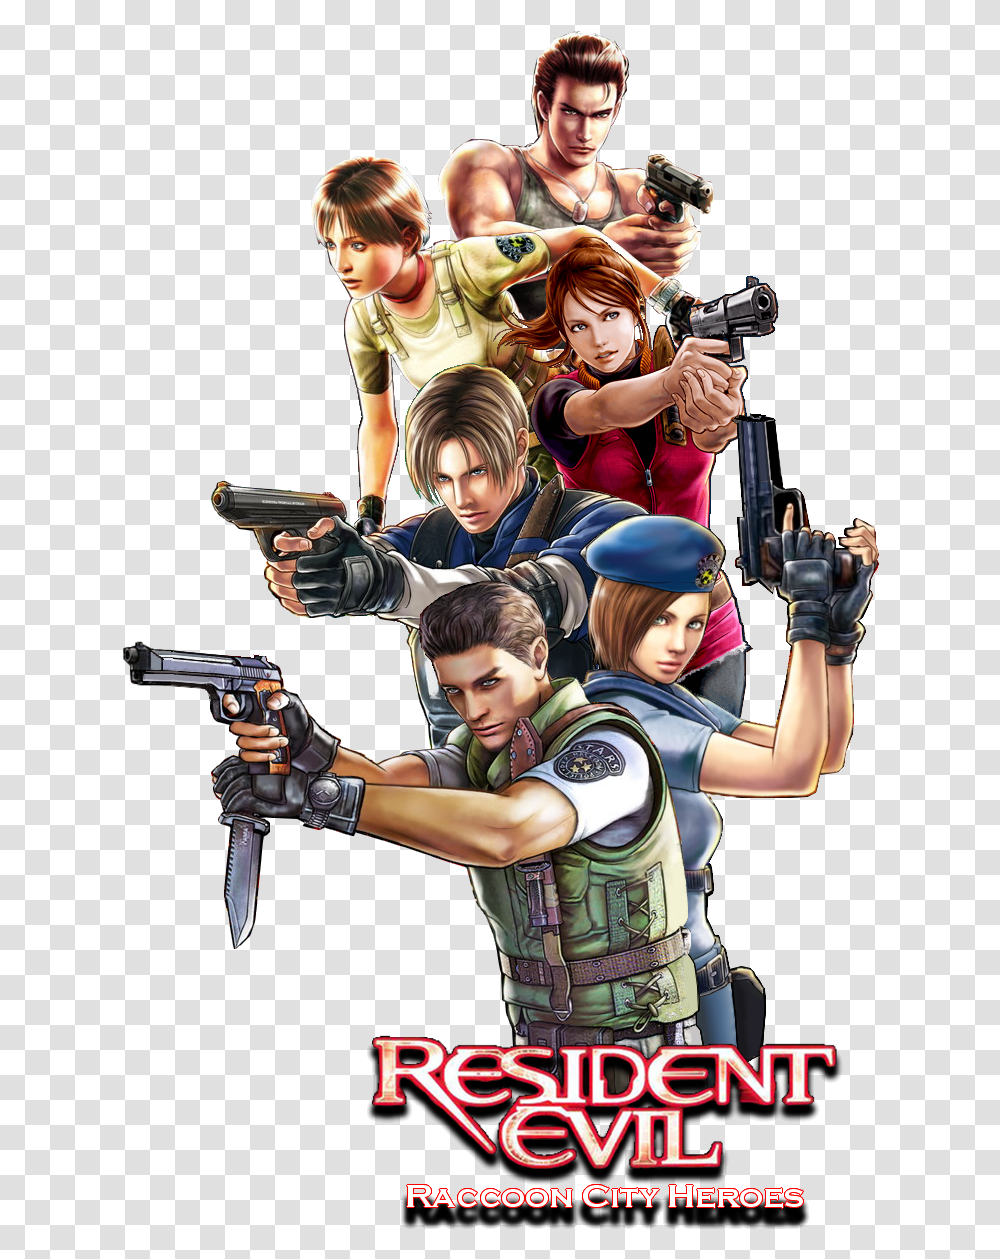 Characteraction Filmanimation Resident Evil Raccoon City Heroes, Person, Human, Costume, Weapon Transparent Png